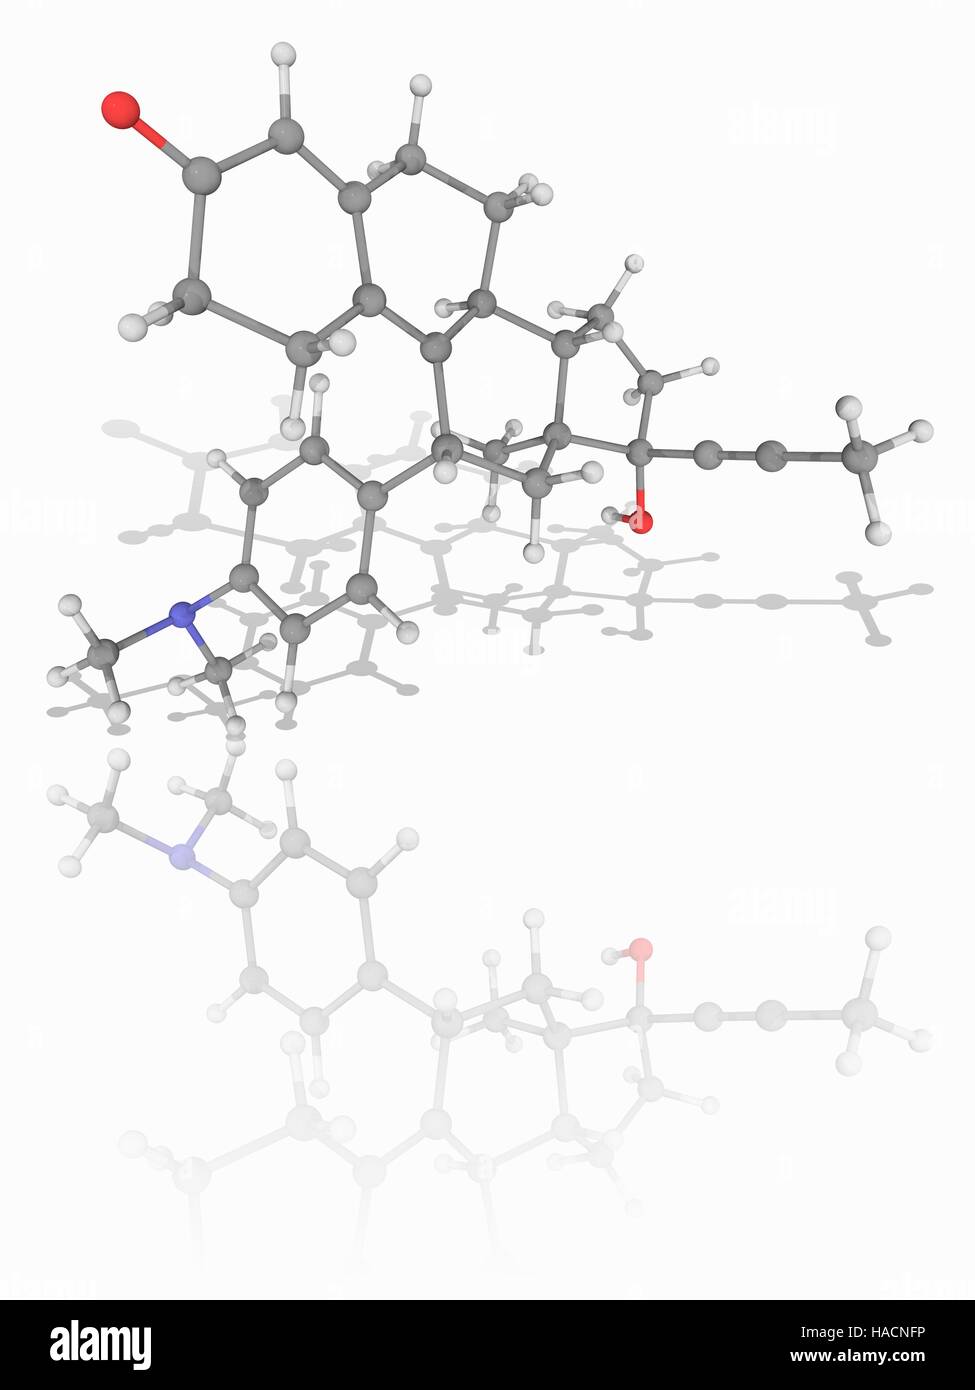 Mifepristone. Molecular model of the progesterone receptor antagonist drug mifepristone (C29.H35.N.O2), used to induce abortions and as an emergency contraceptive. Atoms are represented as spheres and are colour-coded: carbon (grey), hydrogen (white), nitrogen (blue) and oxygen (red). Illustration. Stock Photo